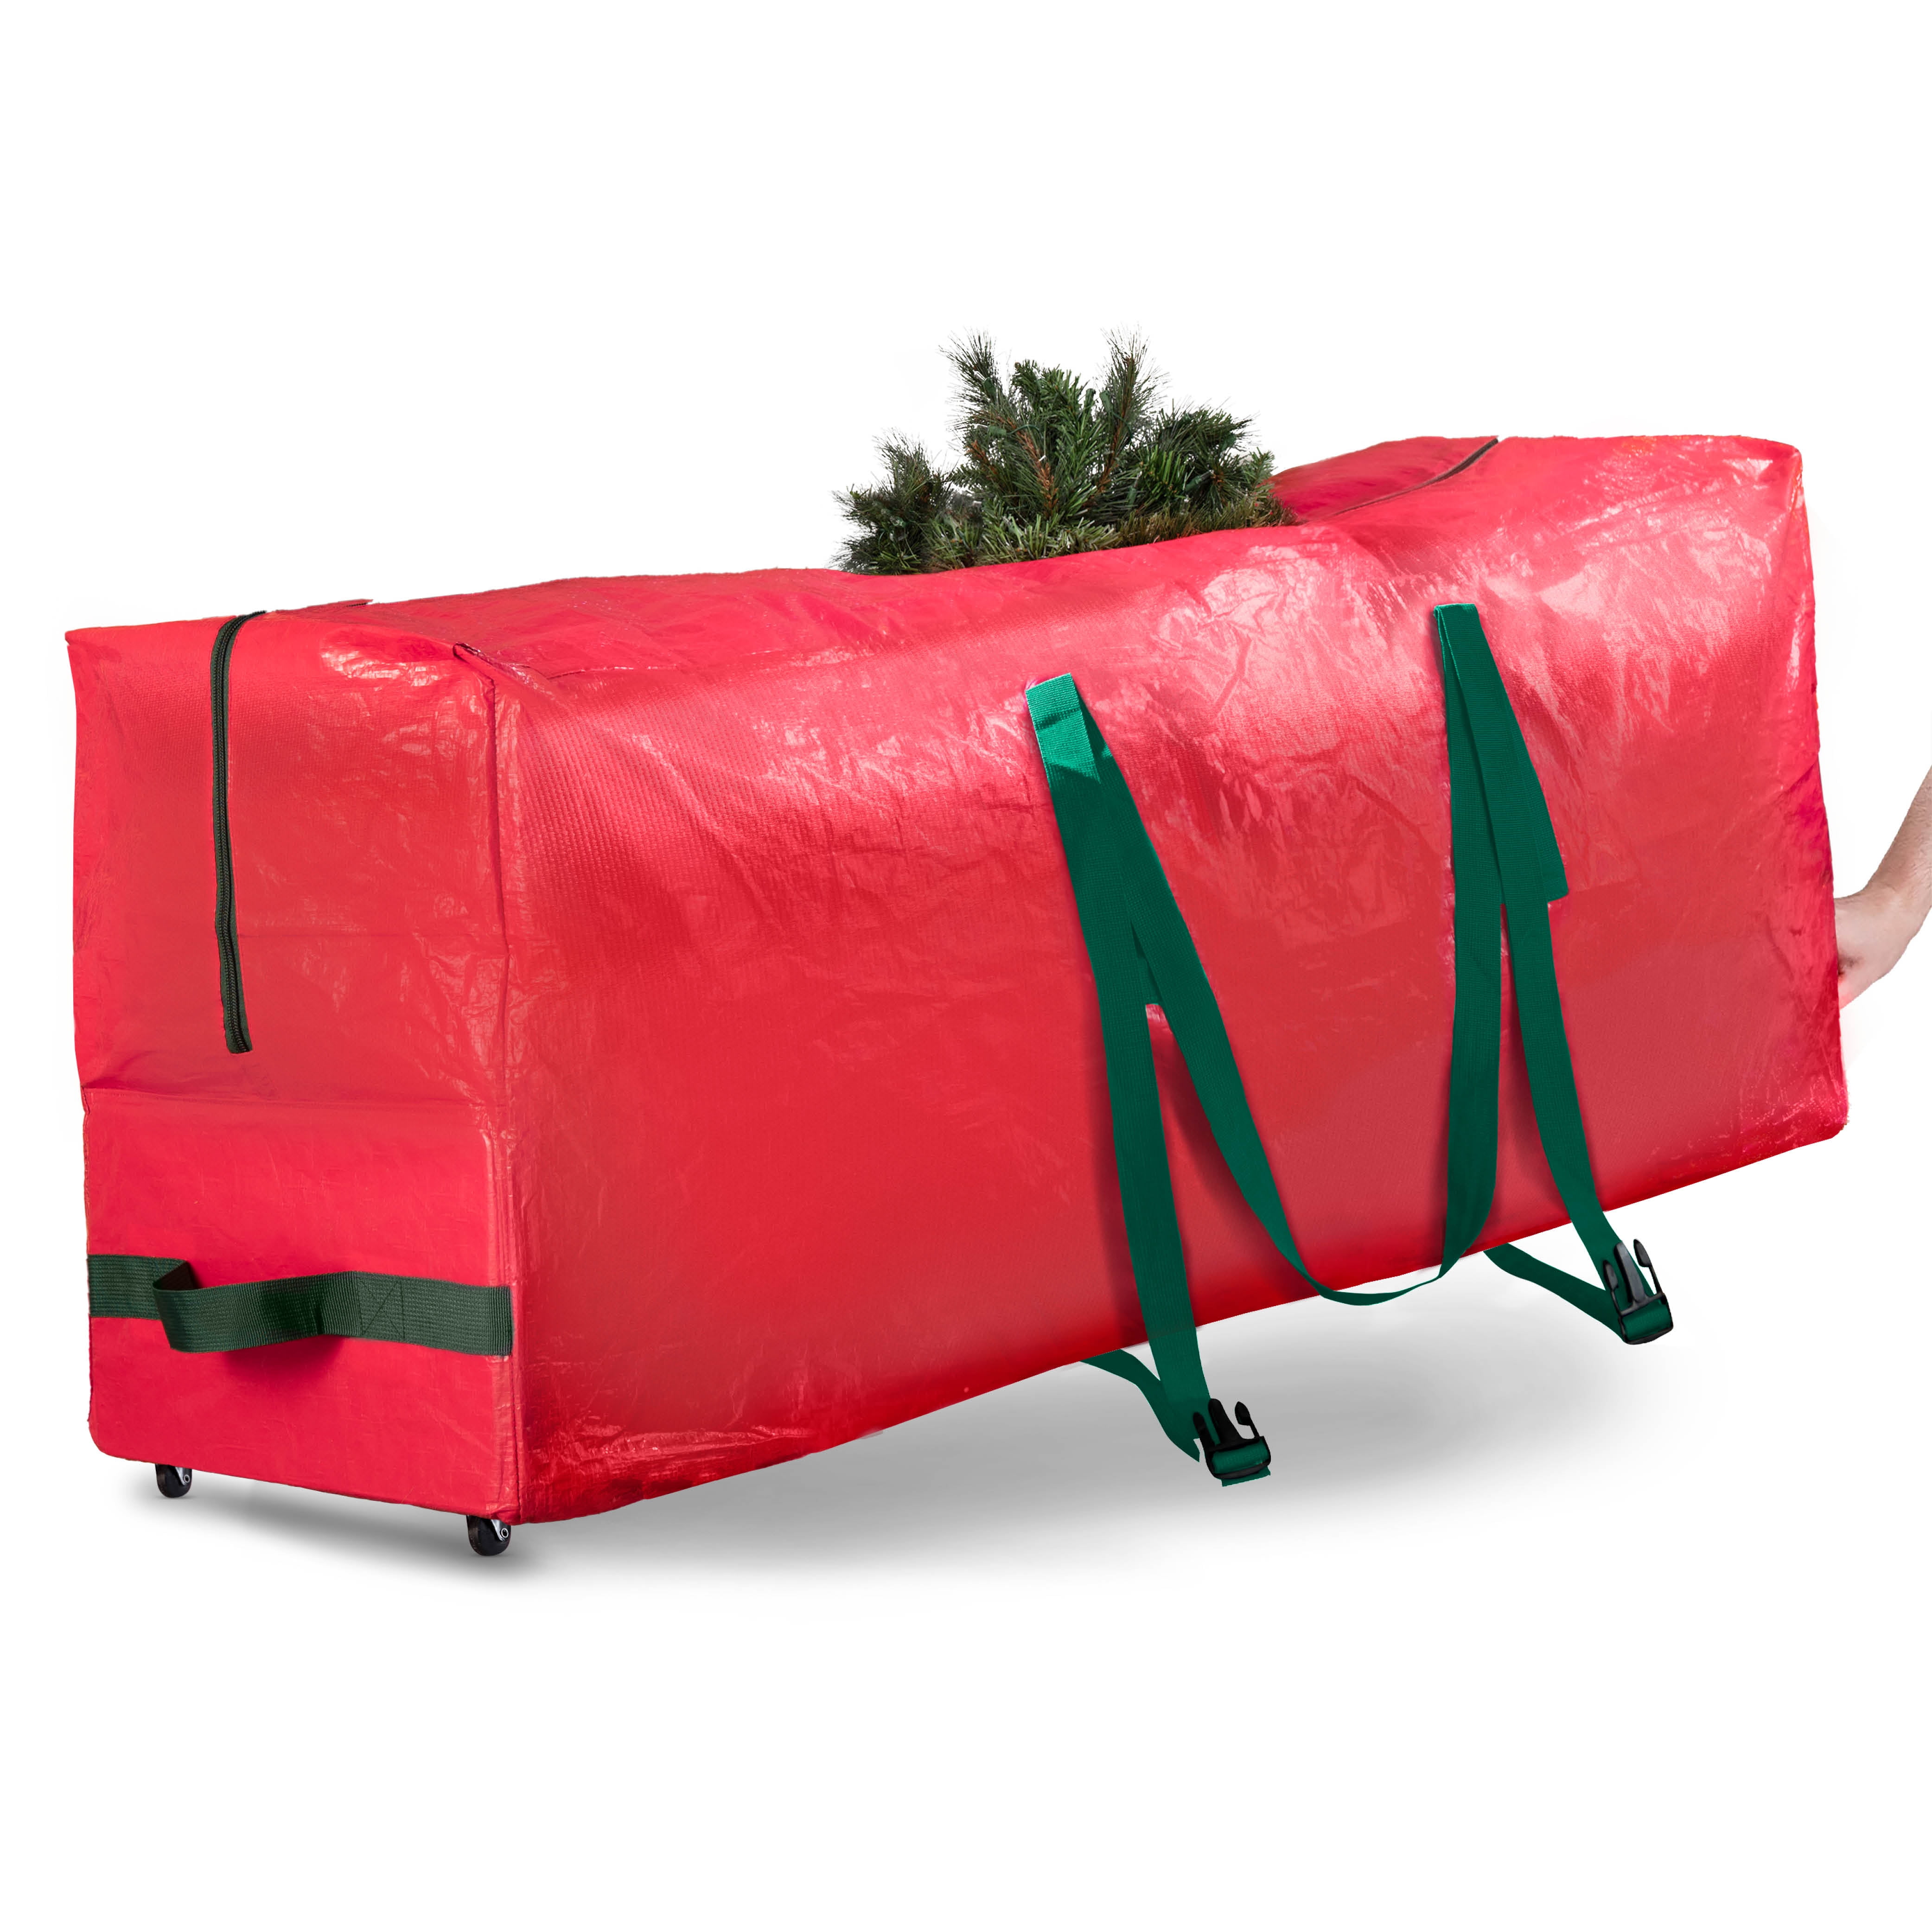 Green Moisture & Insects Stores a 9 ft Xmas Holiday Disassembled Artificial Tree with Durable Handles & Dual Zipper-Waterproof Material Against from Dust CXDY Large Christmas Tree Storage Bag